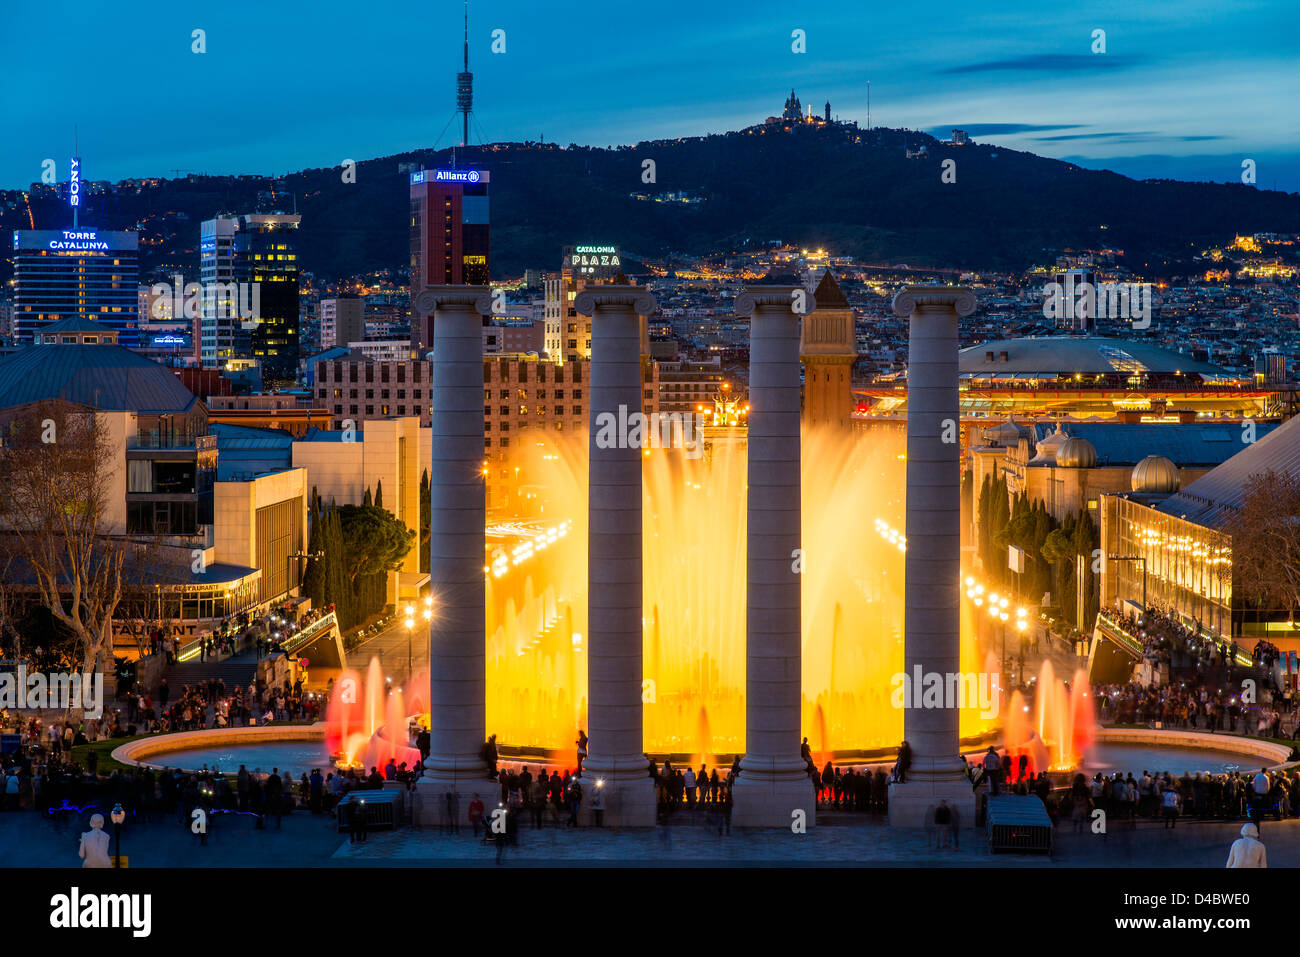 Font Magica or Magic Fountain with city skyline in the background, Barcelona, Catalonia, Spain Stock Photo